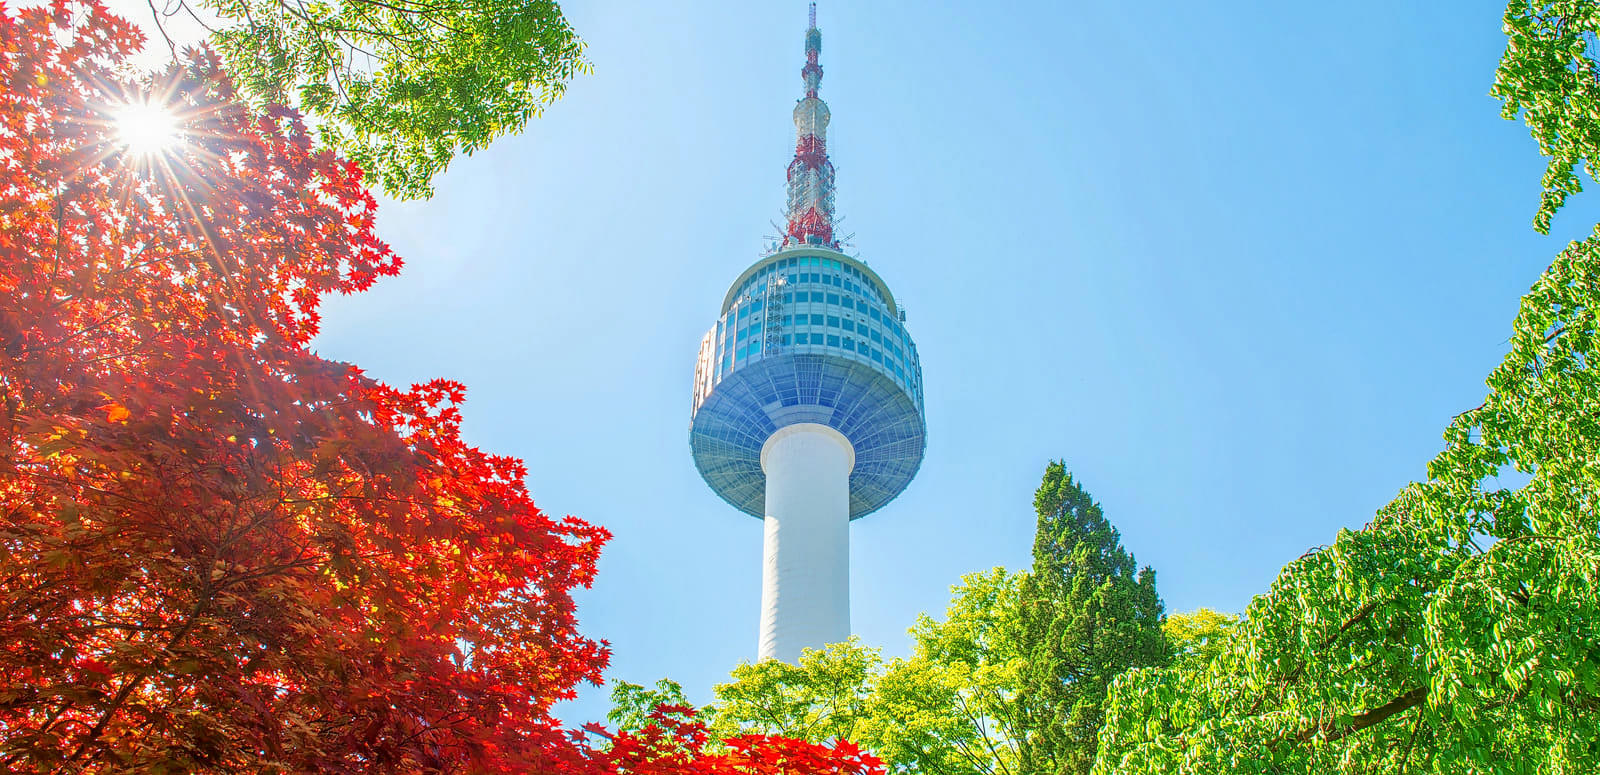 Seoul Tower Overview